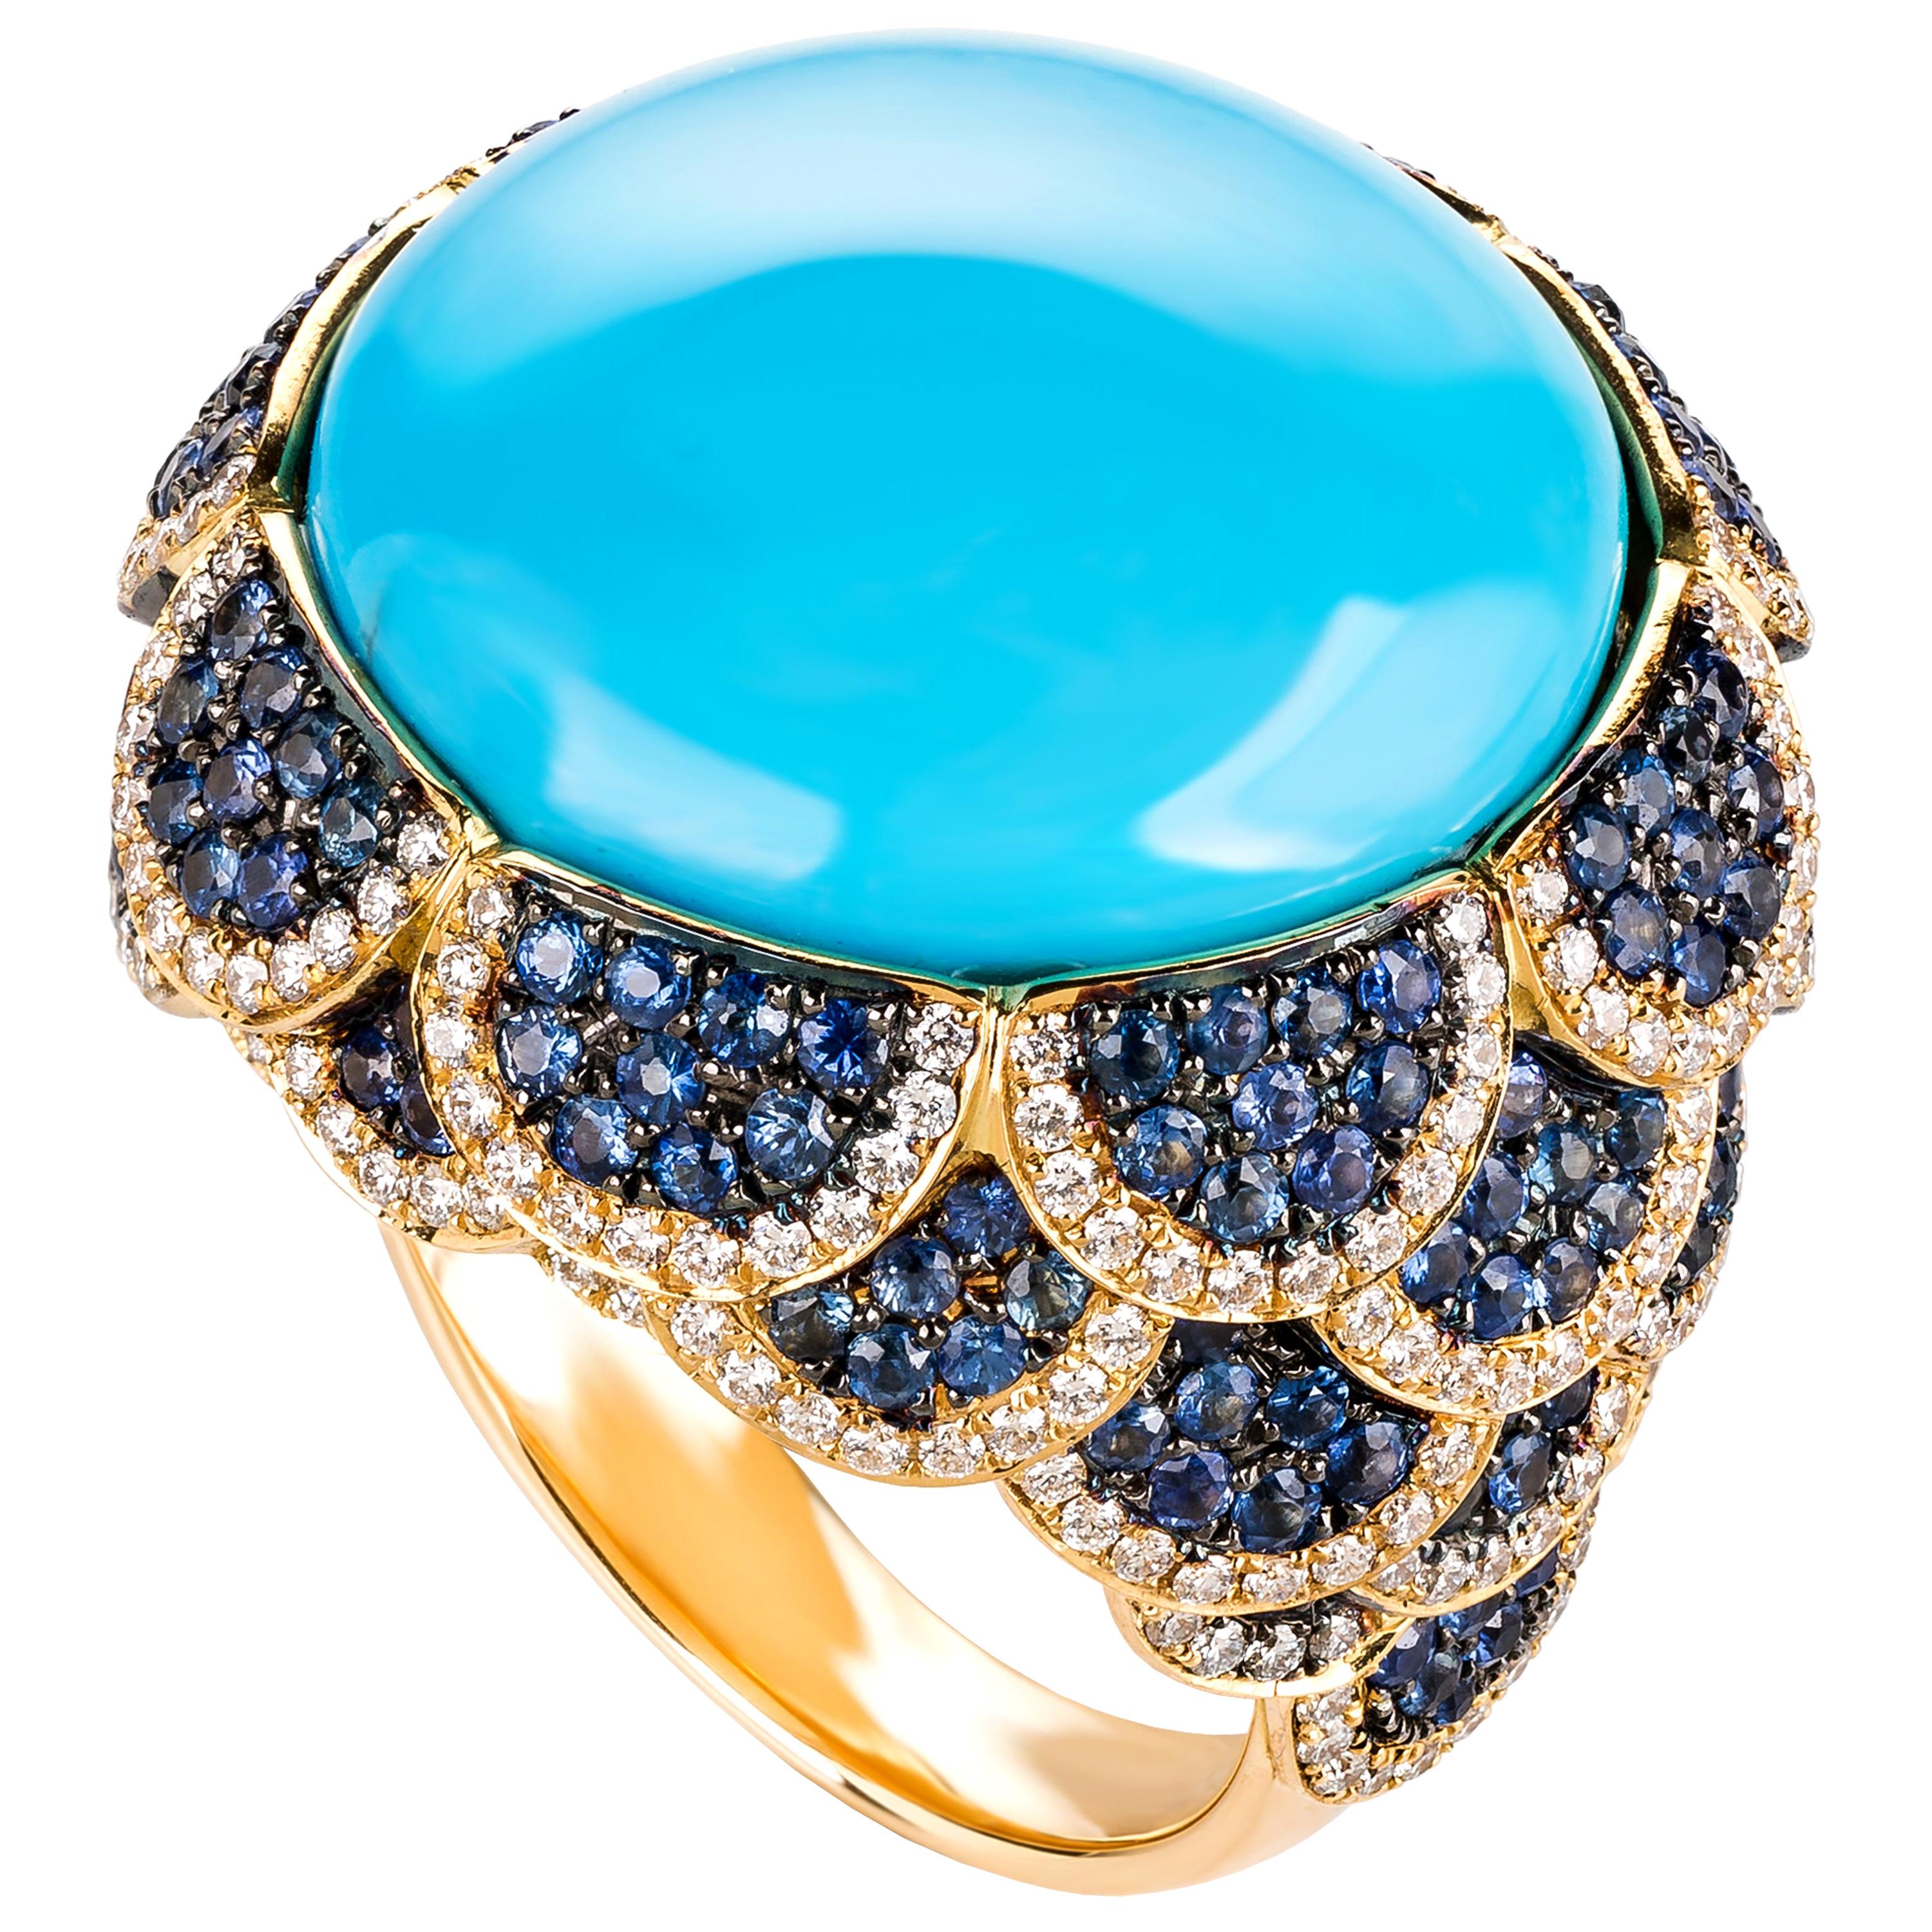 Rosior one-off Turquoise, Diamond and Sapphire Cocktail Ring set in Yellow Gold